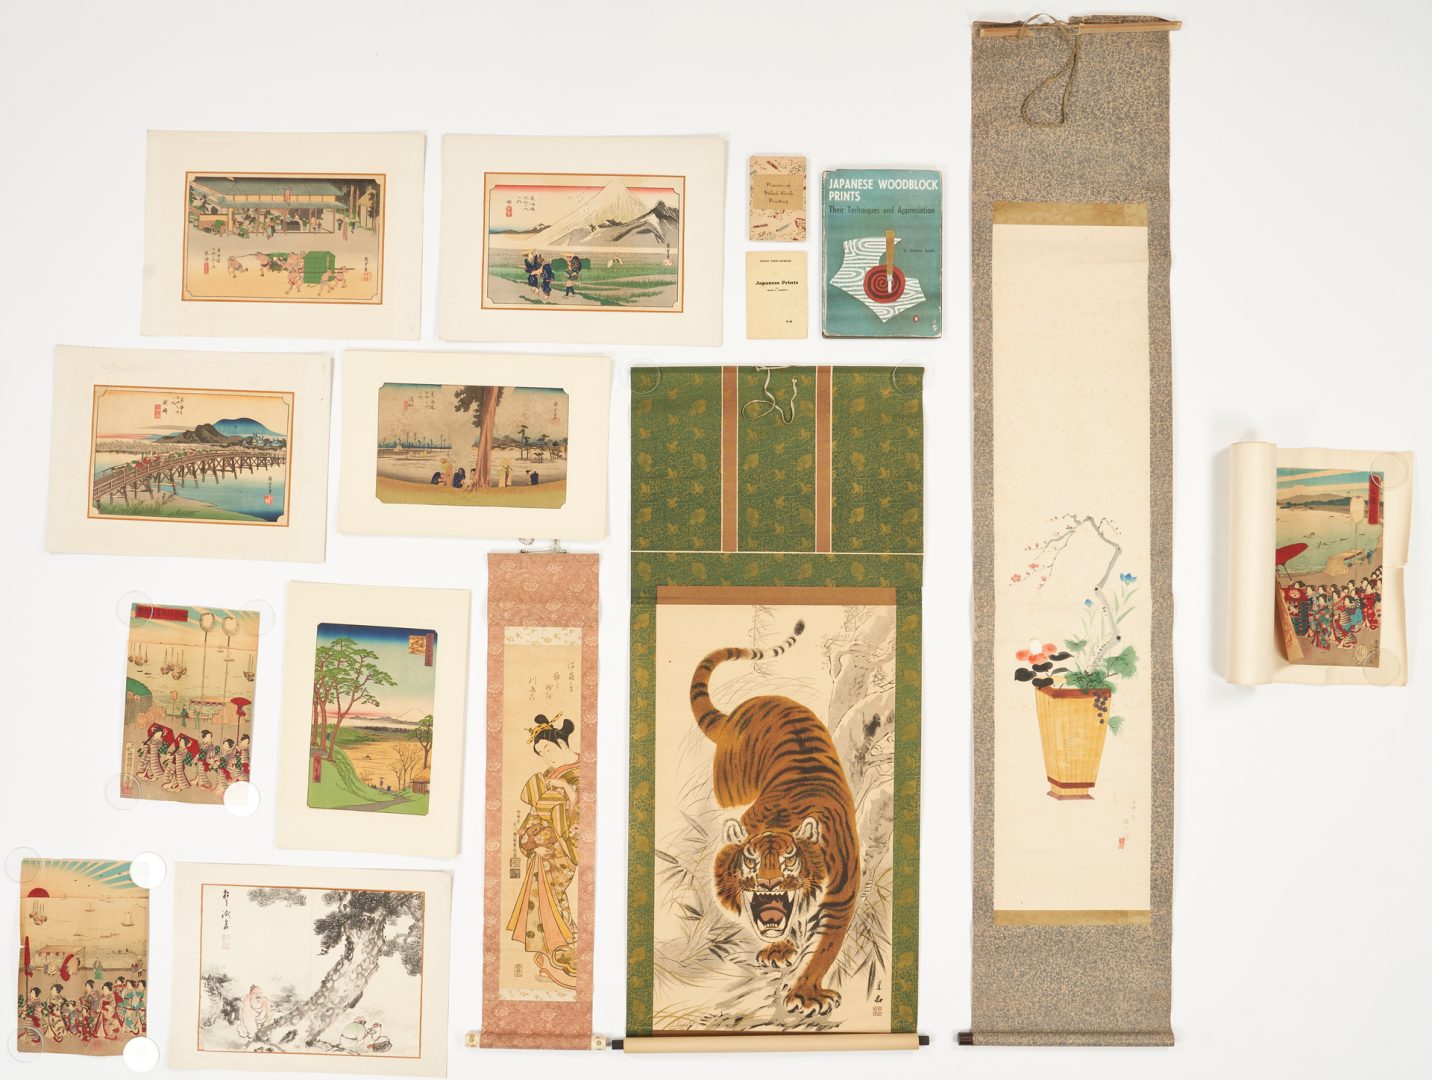 Lot 15: 13 Asian Artworks, incl. Scrolls, Chinese W/C, Japanese Woodblock Prints, 3 Books